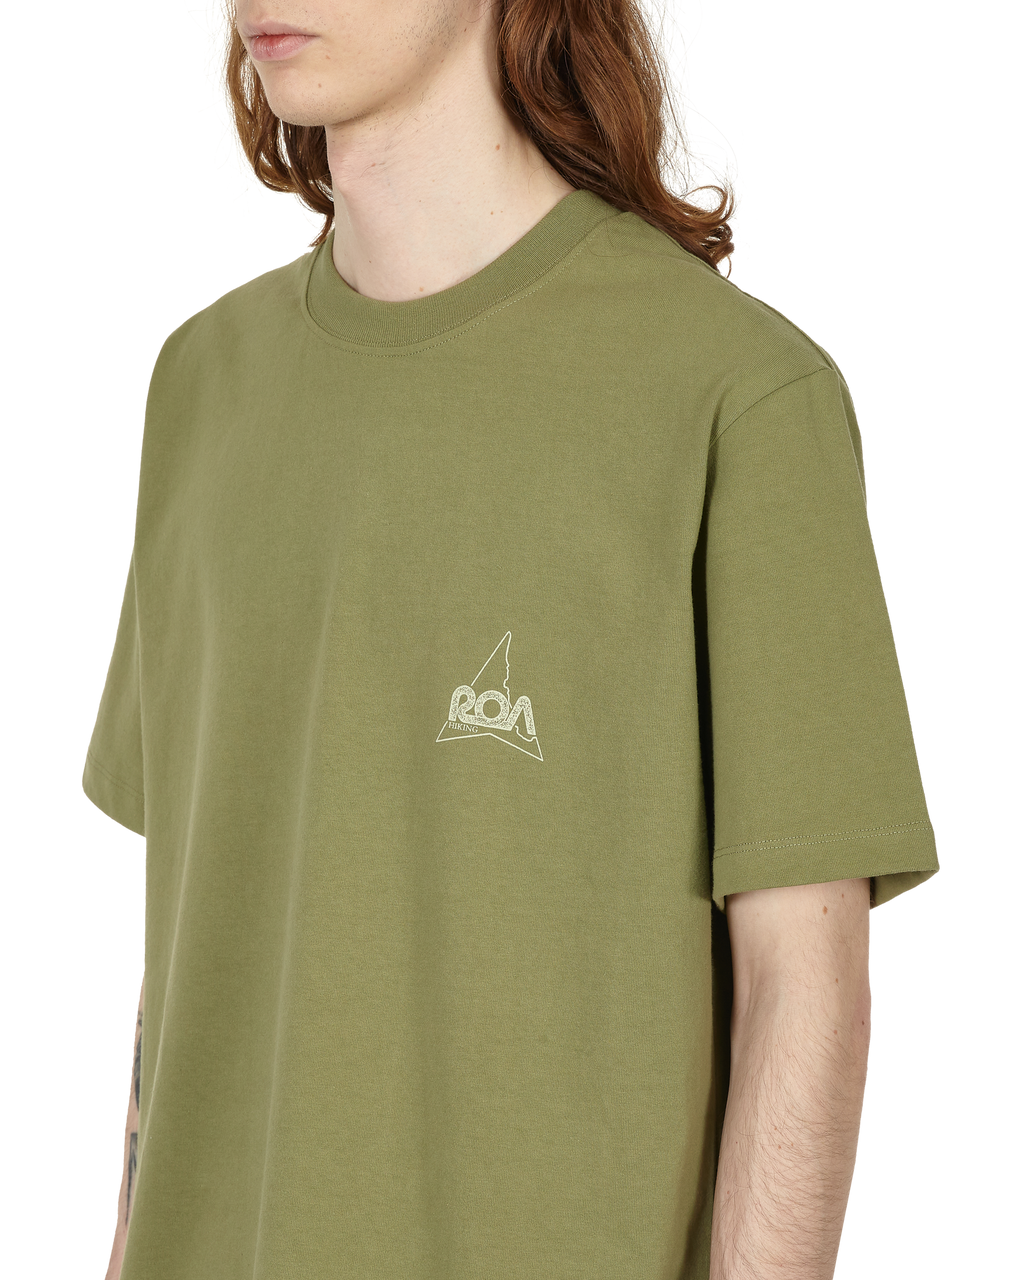 ROA Shortsleeve Graphic J277310-L-Green front